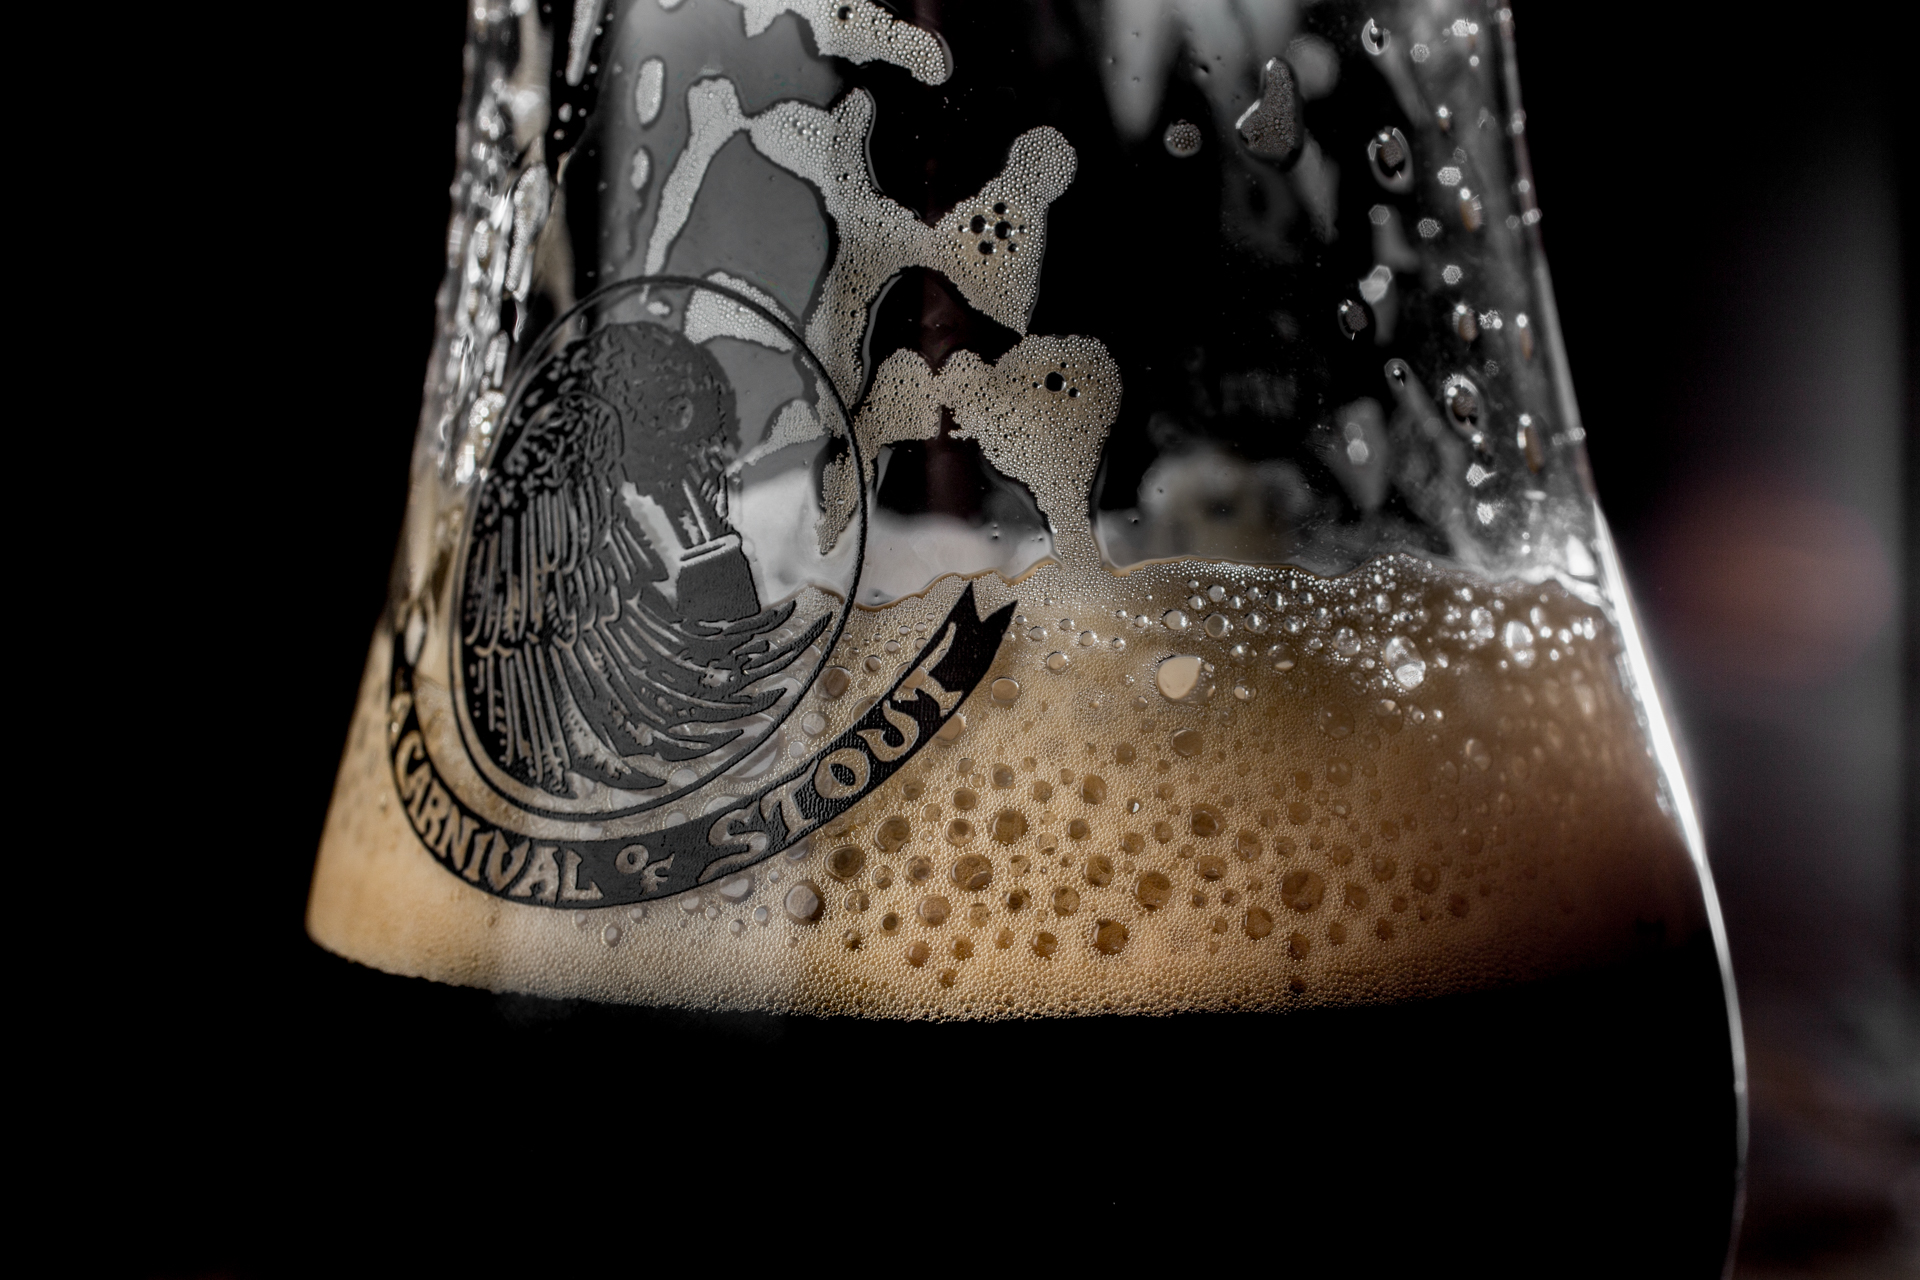 image of FoDA Glass courtesy of Fort George Brewery